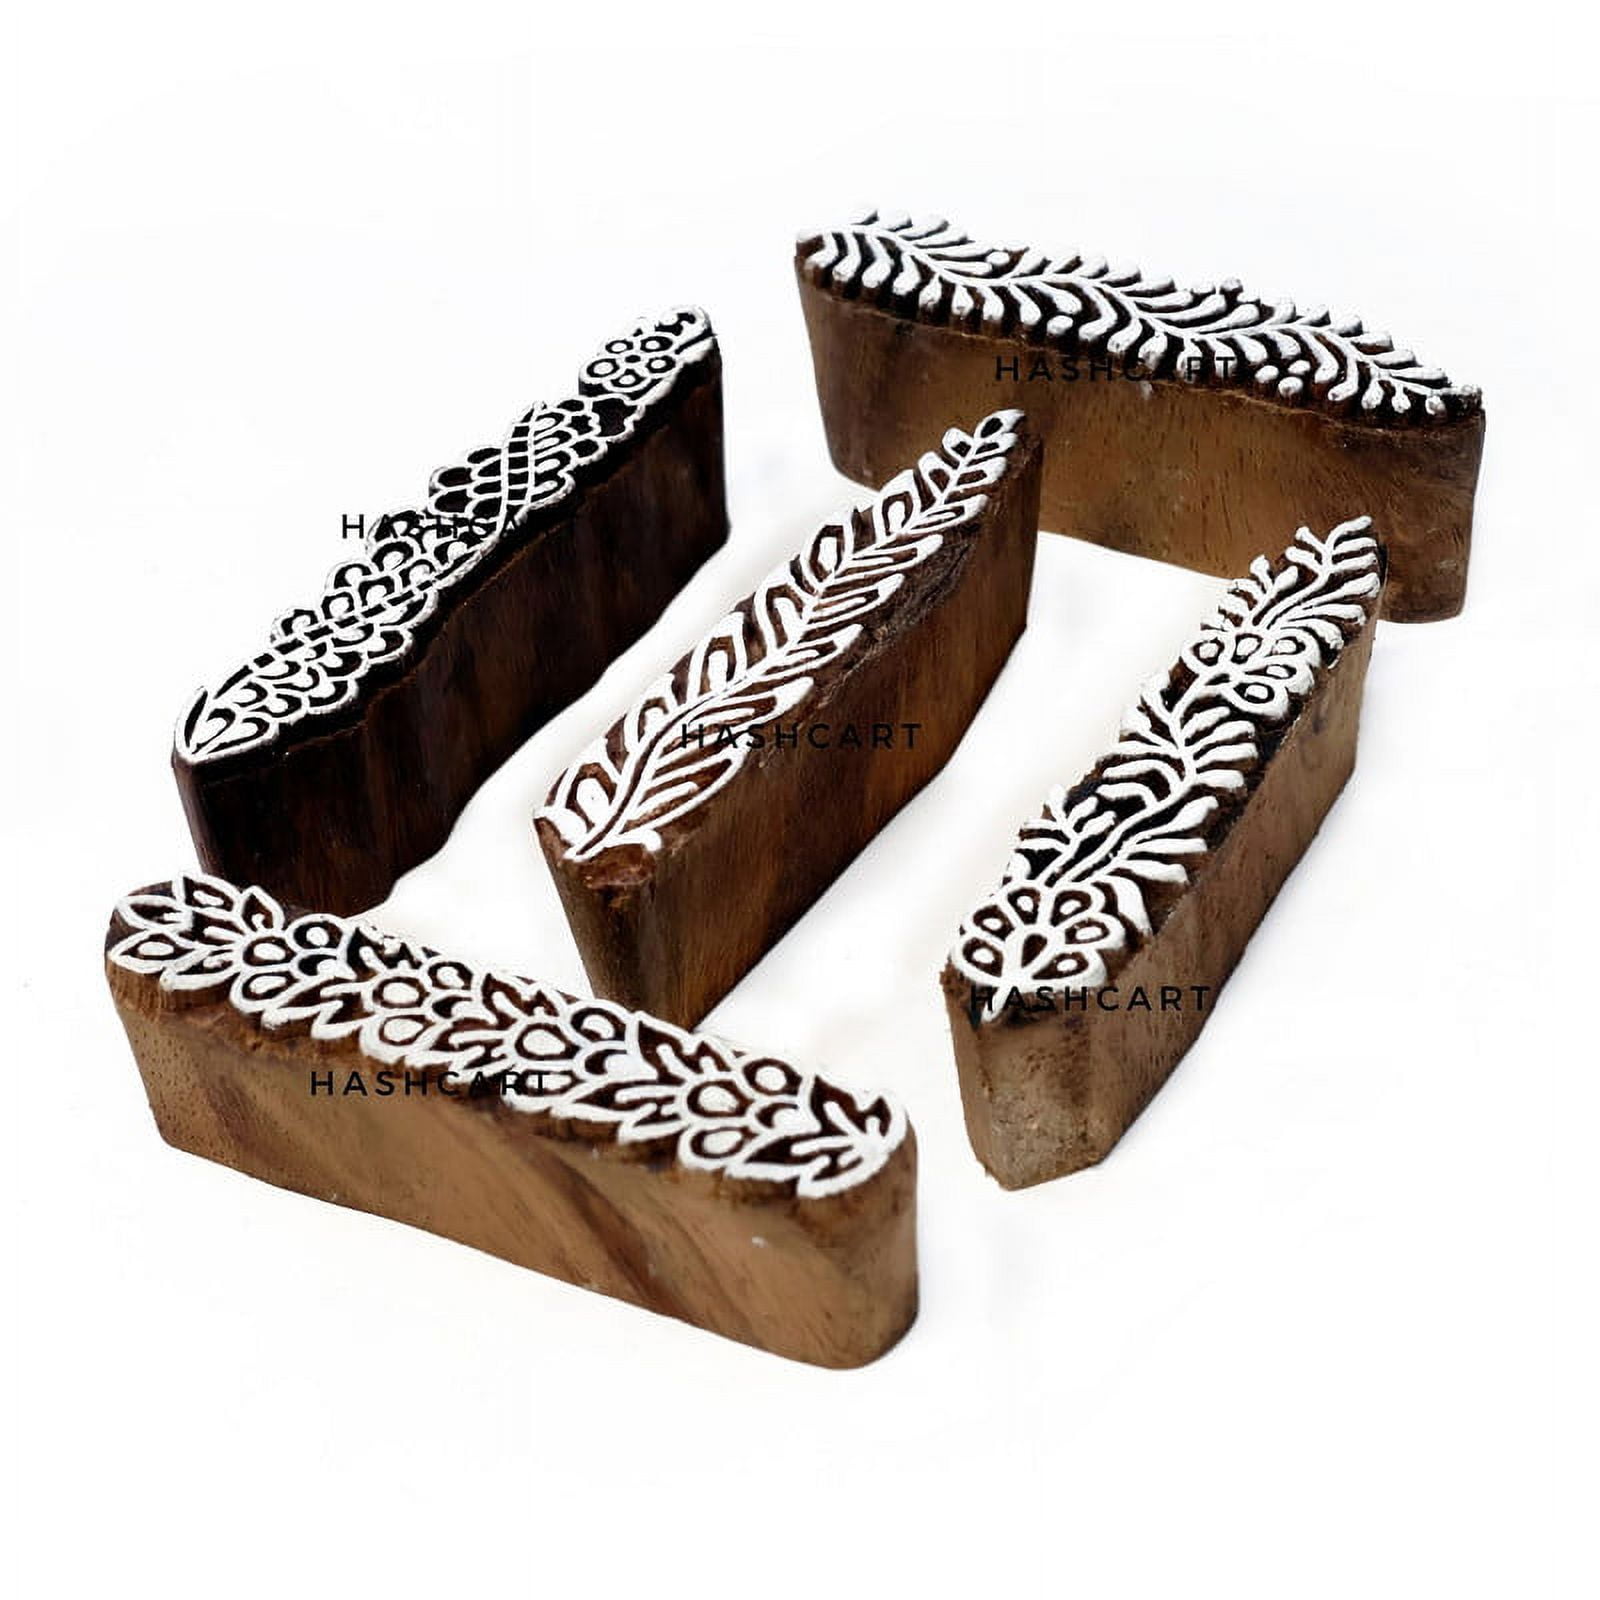 Eco-Friendly Pugmark Block Printing Kit Handmade in India, - Little Paws